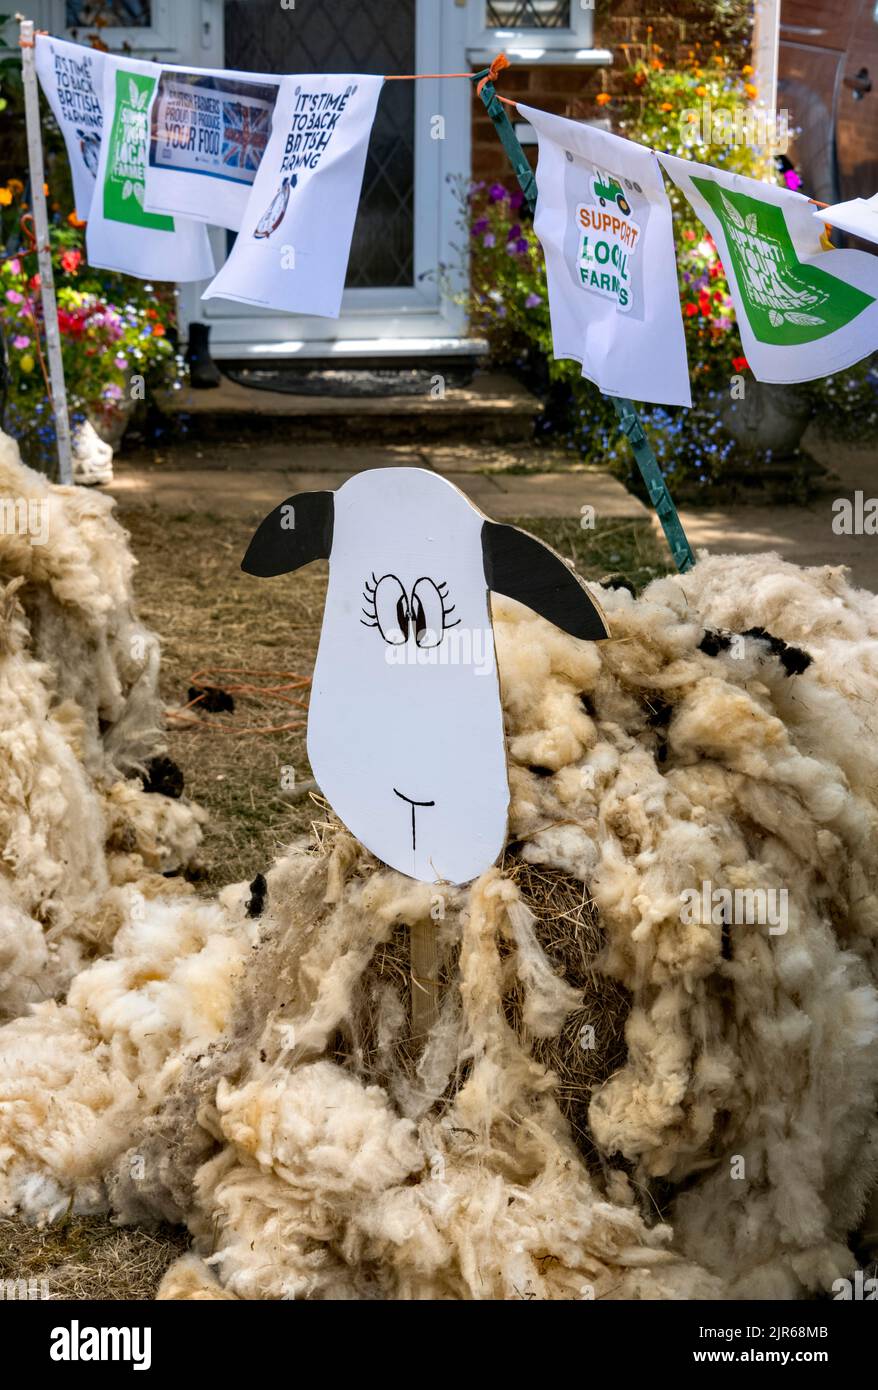 Flamstead Scarecrow Festival -Back British Farming flyers with Support Local Farmers flyers - 5 reasons to back British Farming with sheeps wool Stock Photo